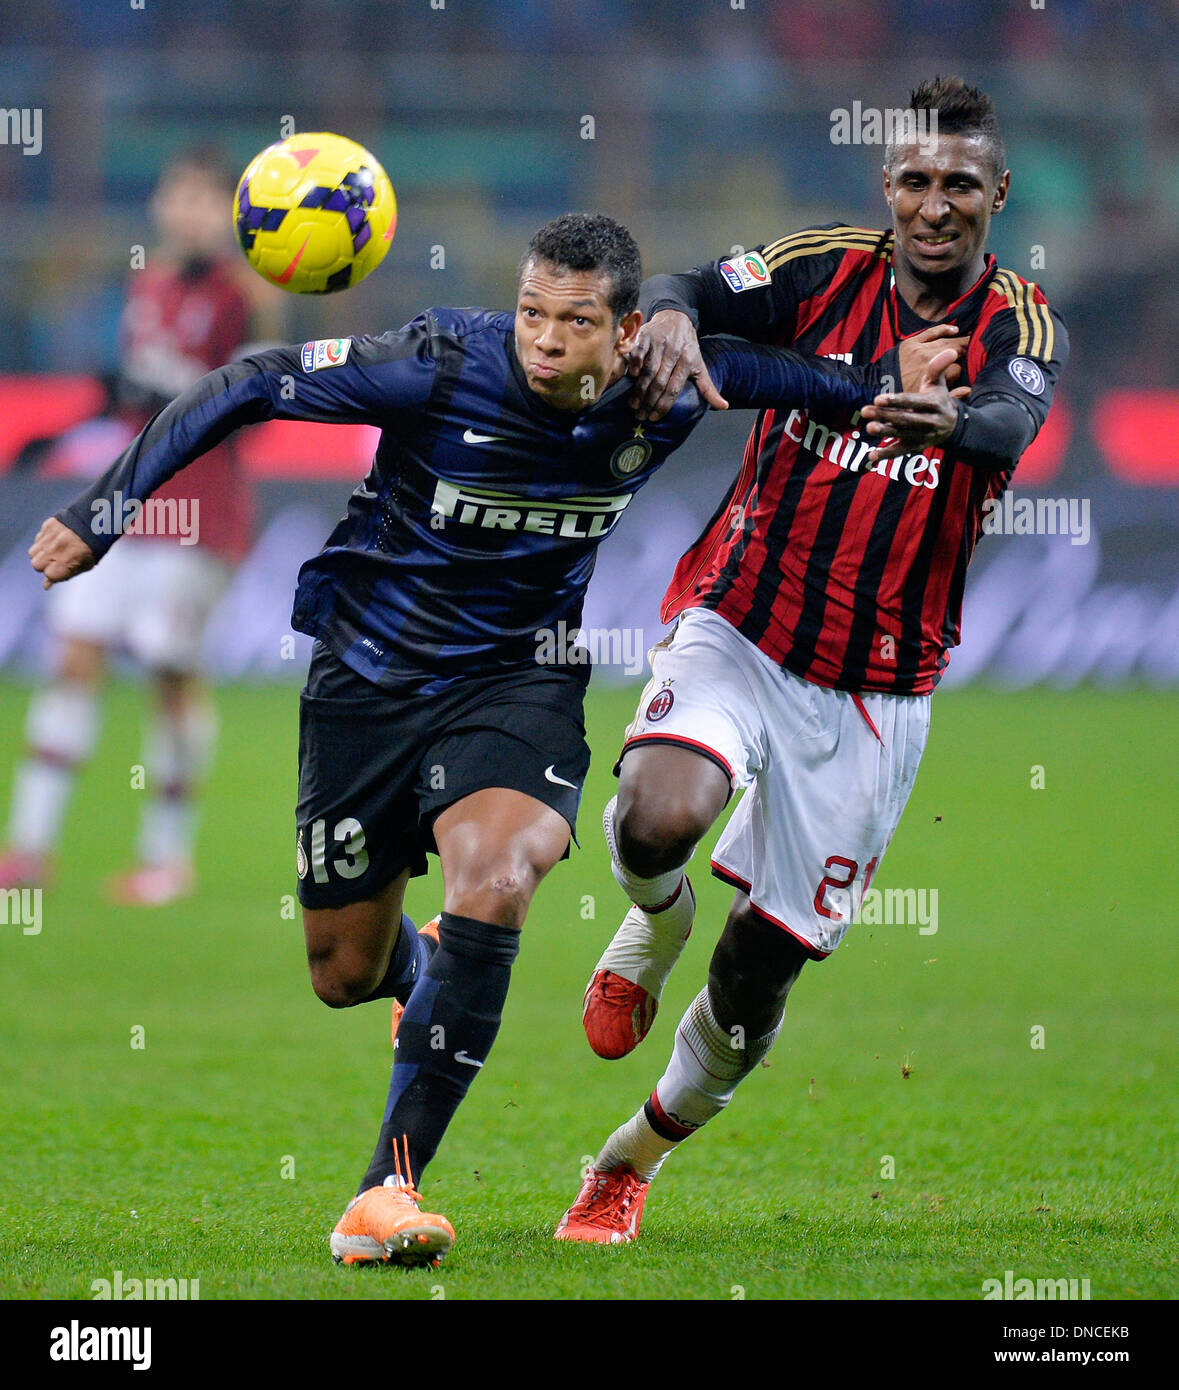 Milan, Italy. 23rd Dec, 2013. Inter Milan's Fredy Guarin (L) vies with AC Milan's Kevin Constant during their Italian Serie A soccer match in Milan, Italy, Dec. 22, 2013. Credit:  Alberto Lingria/Xinhua/Alamy Live News Stock Photo